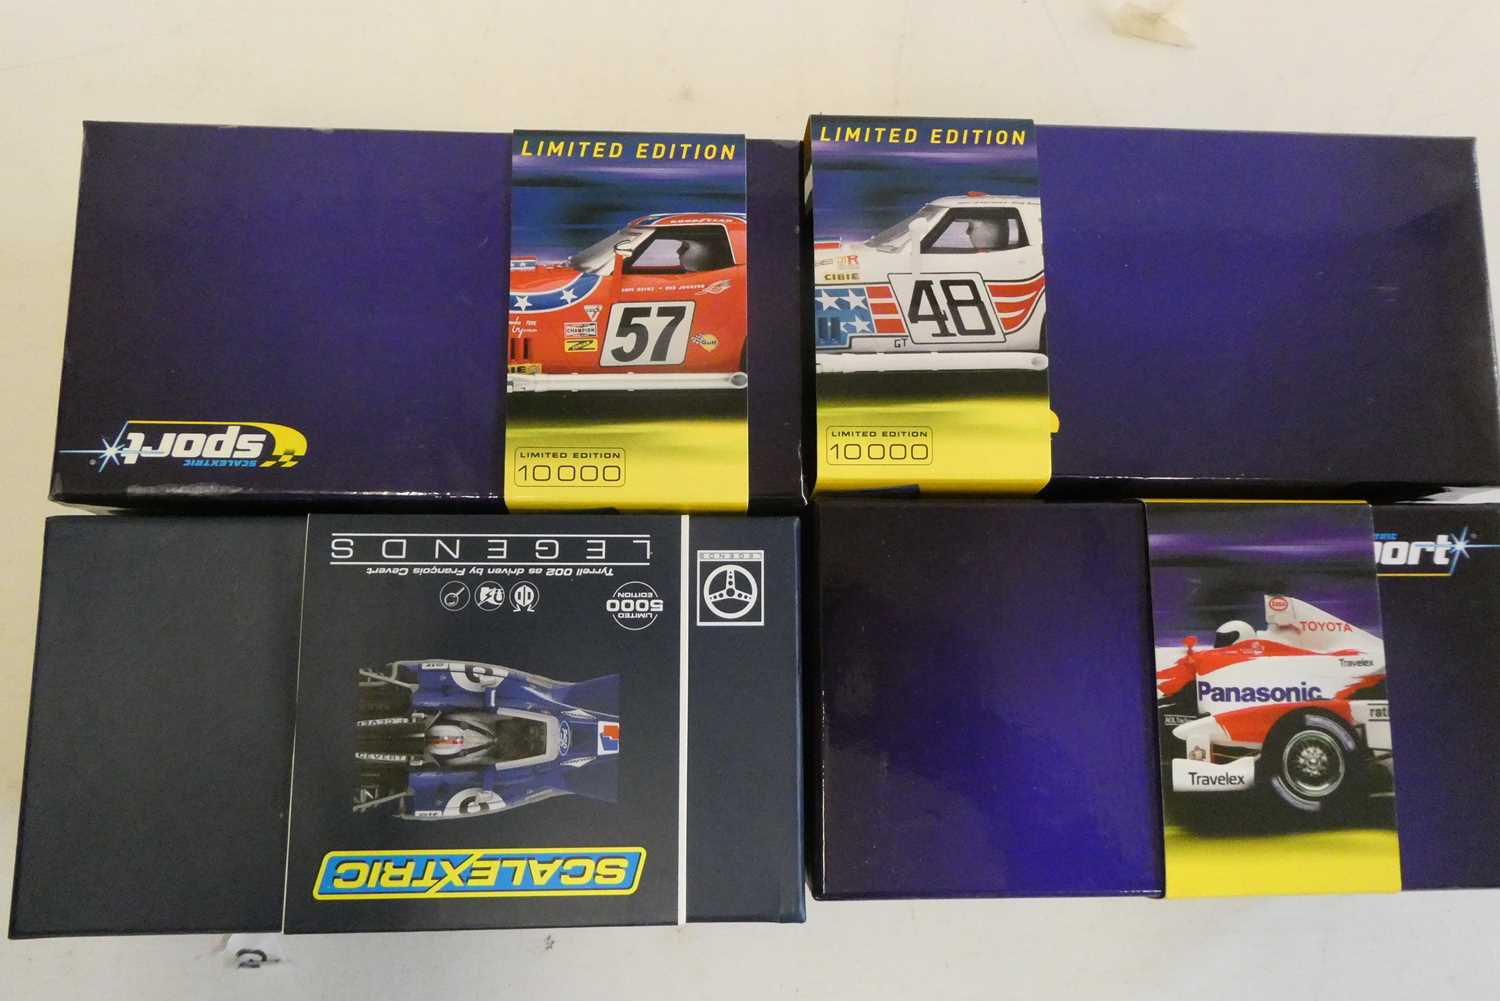 Four Scalextric cars comprising two Chevrolet Corvettes, Toyota TF102 and Terrell F1 car, all